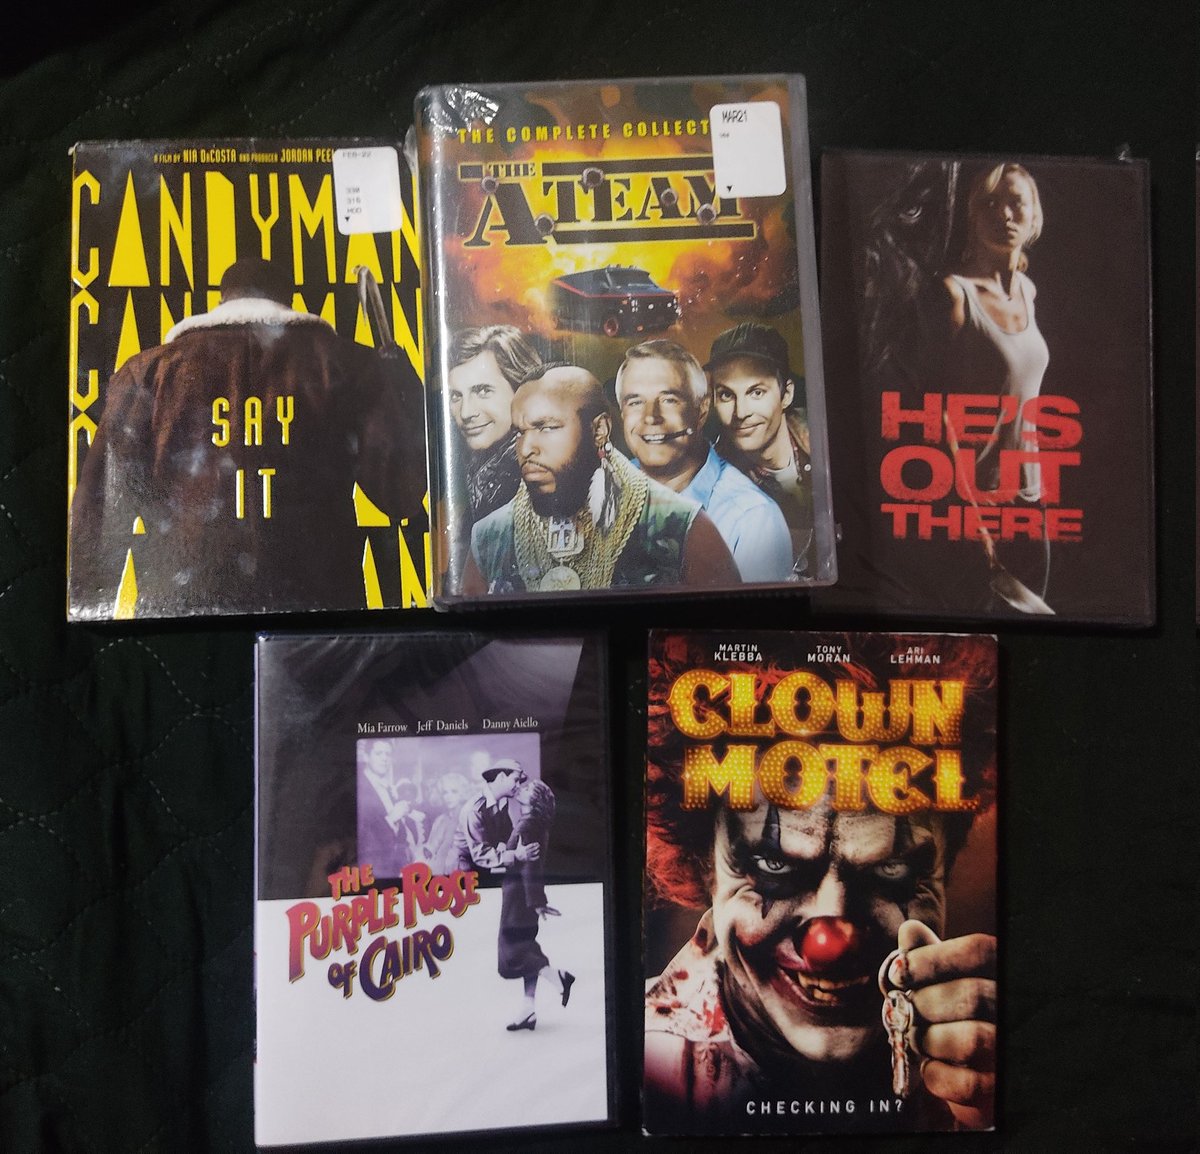 The last haul of the year #candyman #ateam #clowmhotel #heshoutthere #moviecollection #dollartreemovies #dollartreedvds #swapmeet